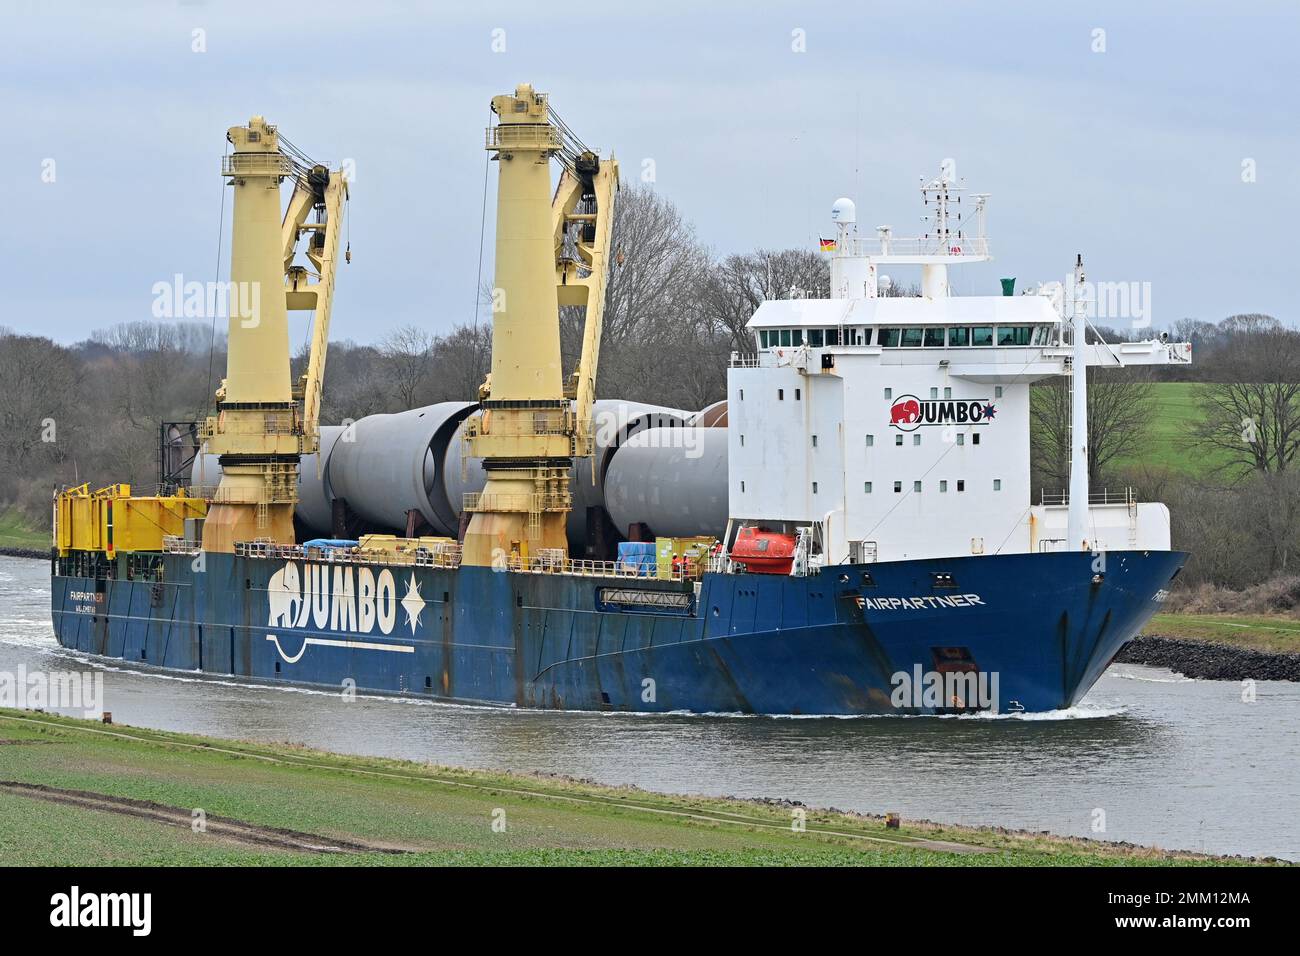 Heavy Load Carrier FAIRPARTNER passing the Kiel Canal on a trip from Rostock to the U.S. Stock Photo